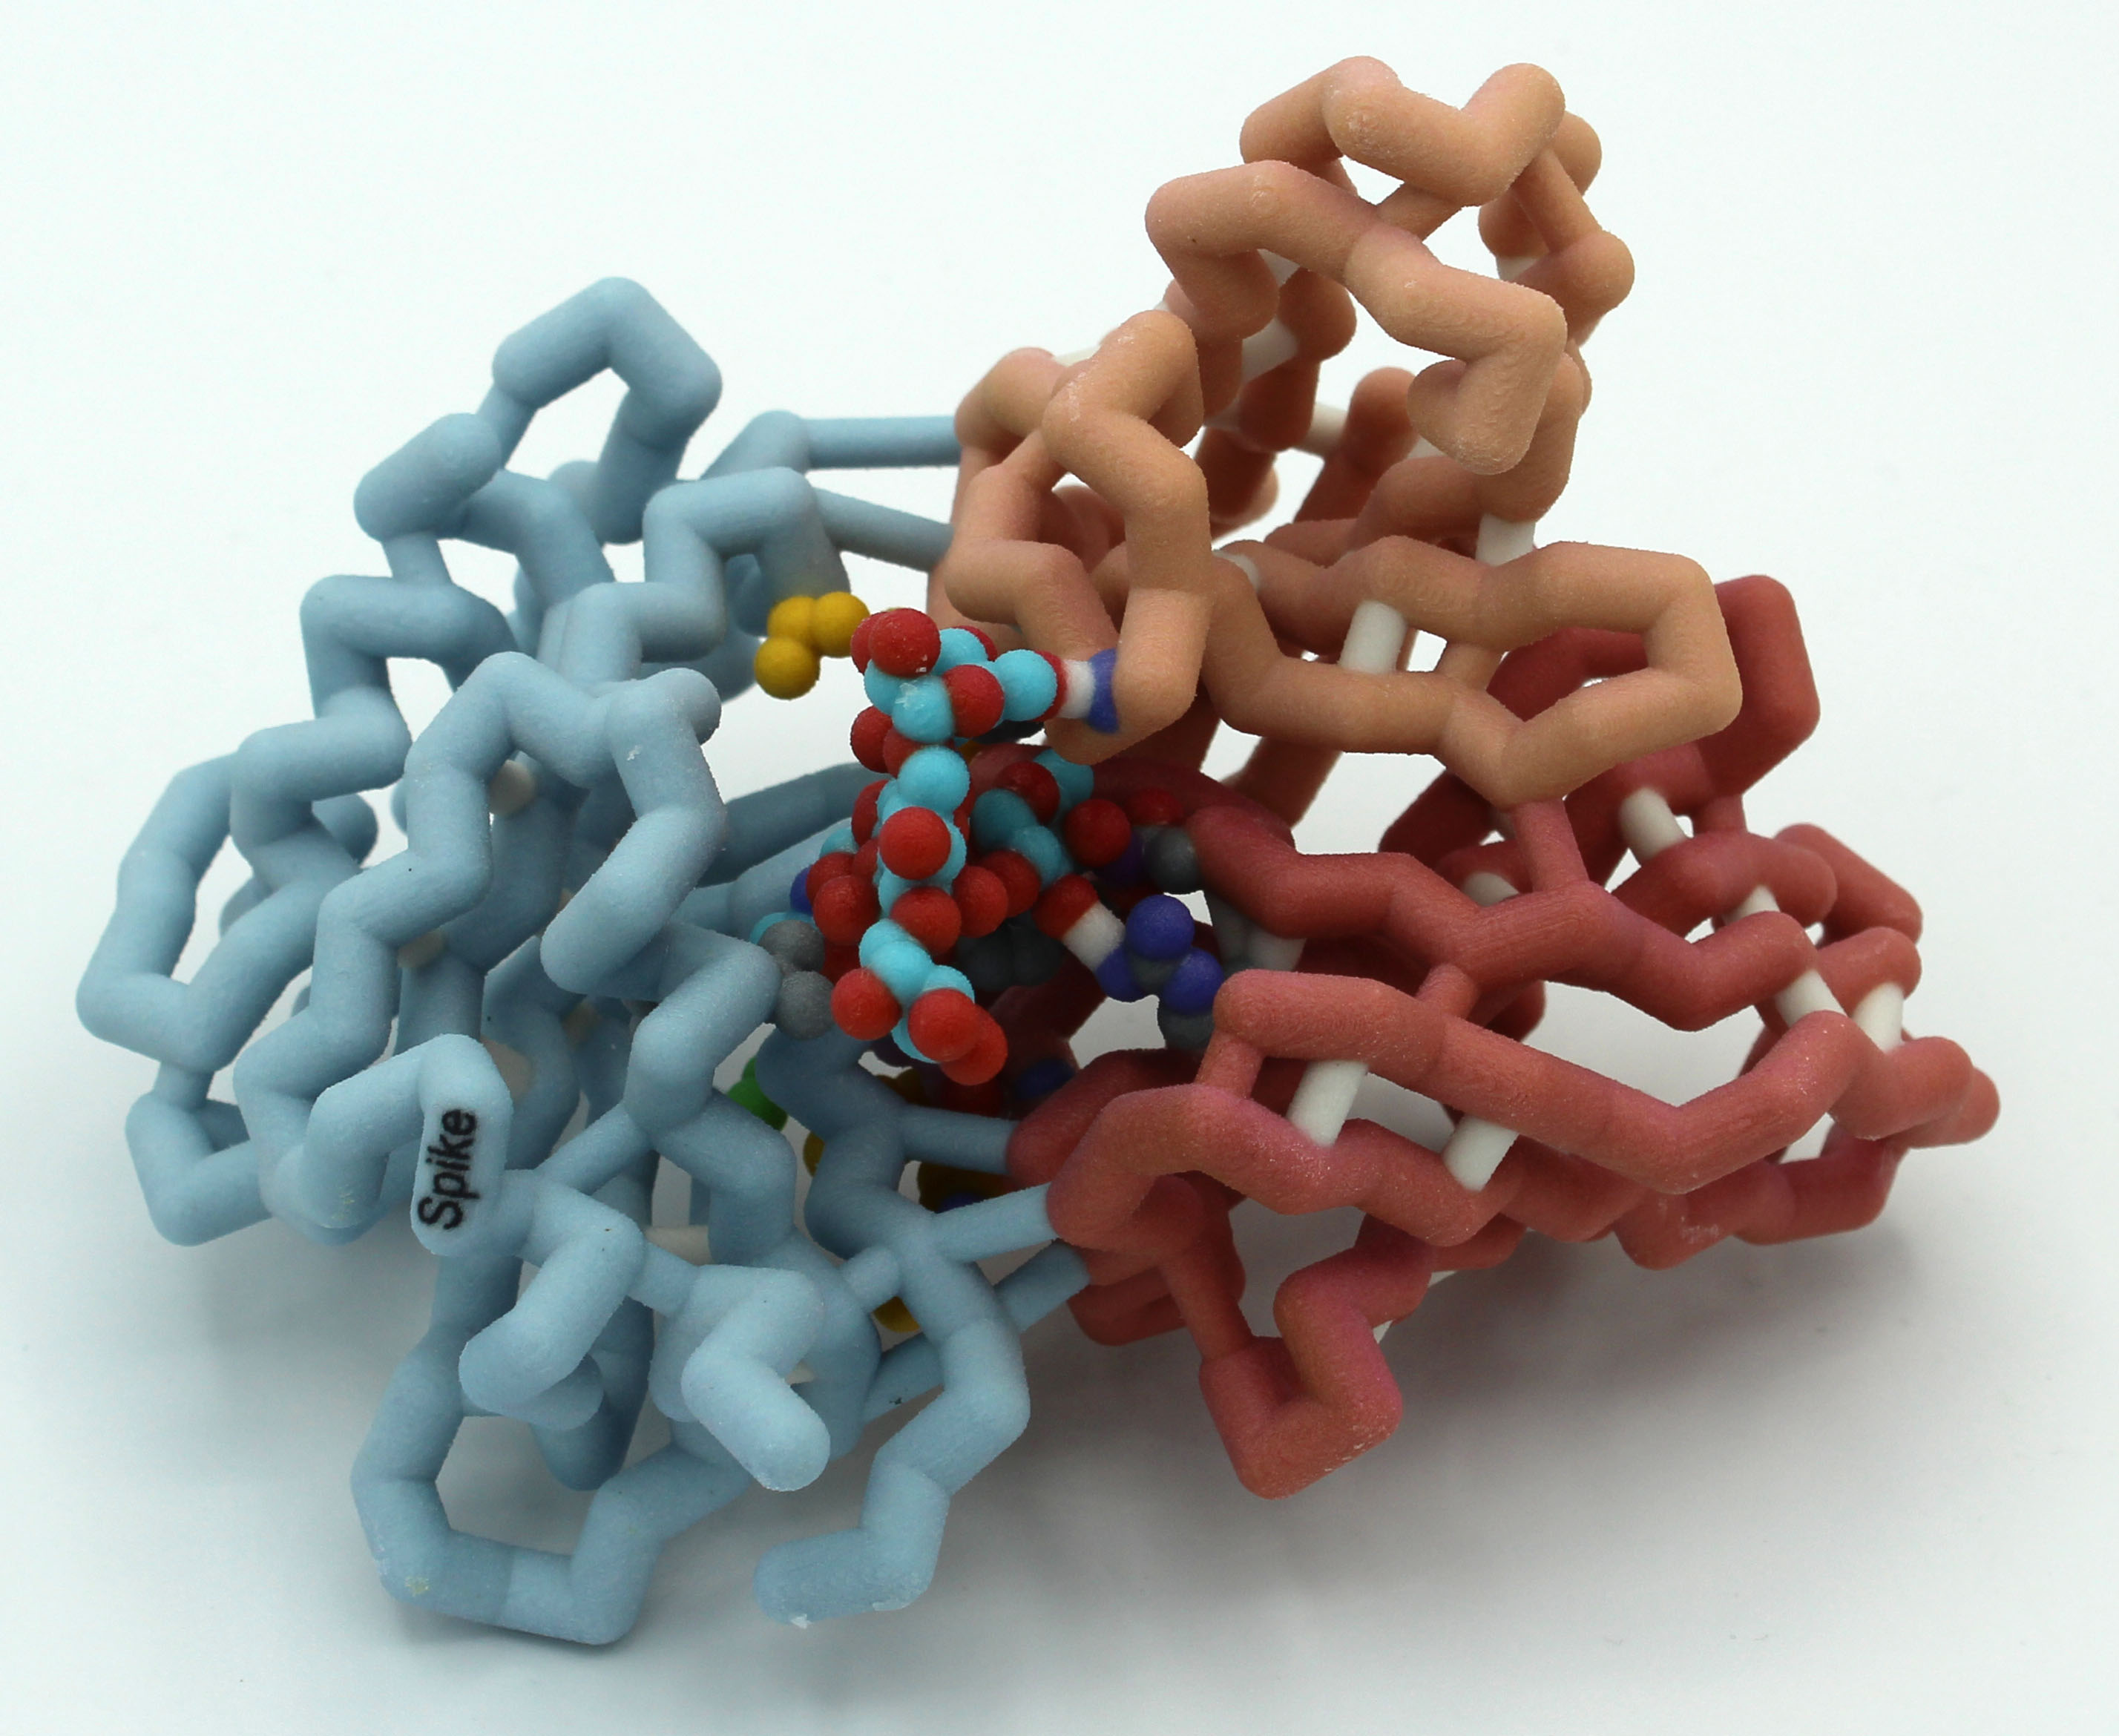 Physical model of portion of SARS-CoV-2 spike protein with bound monoclonal antibody S309